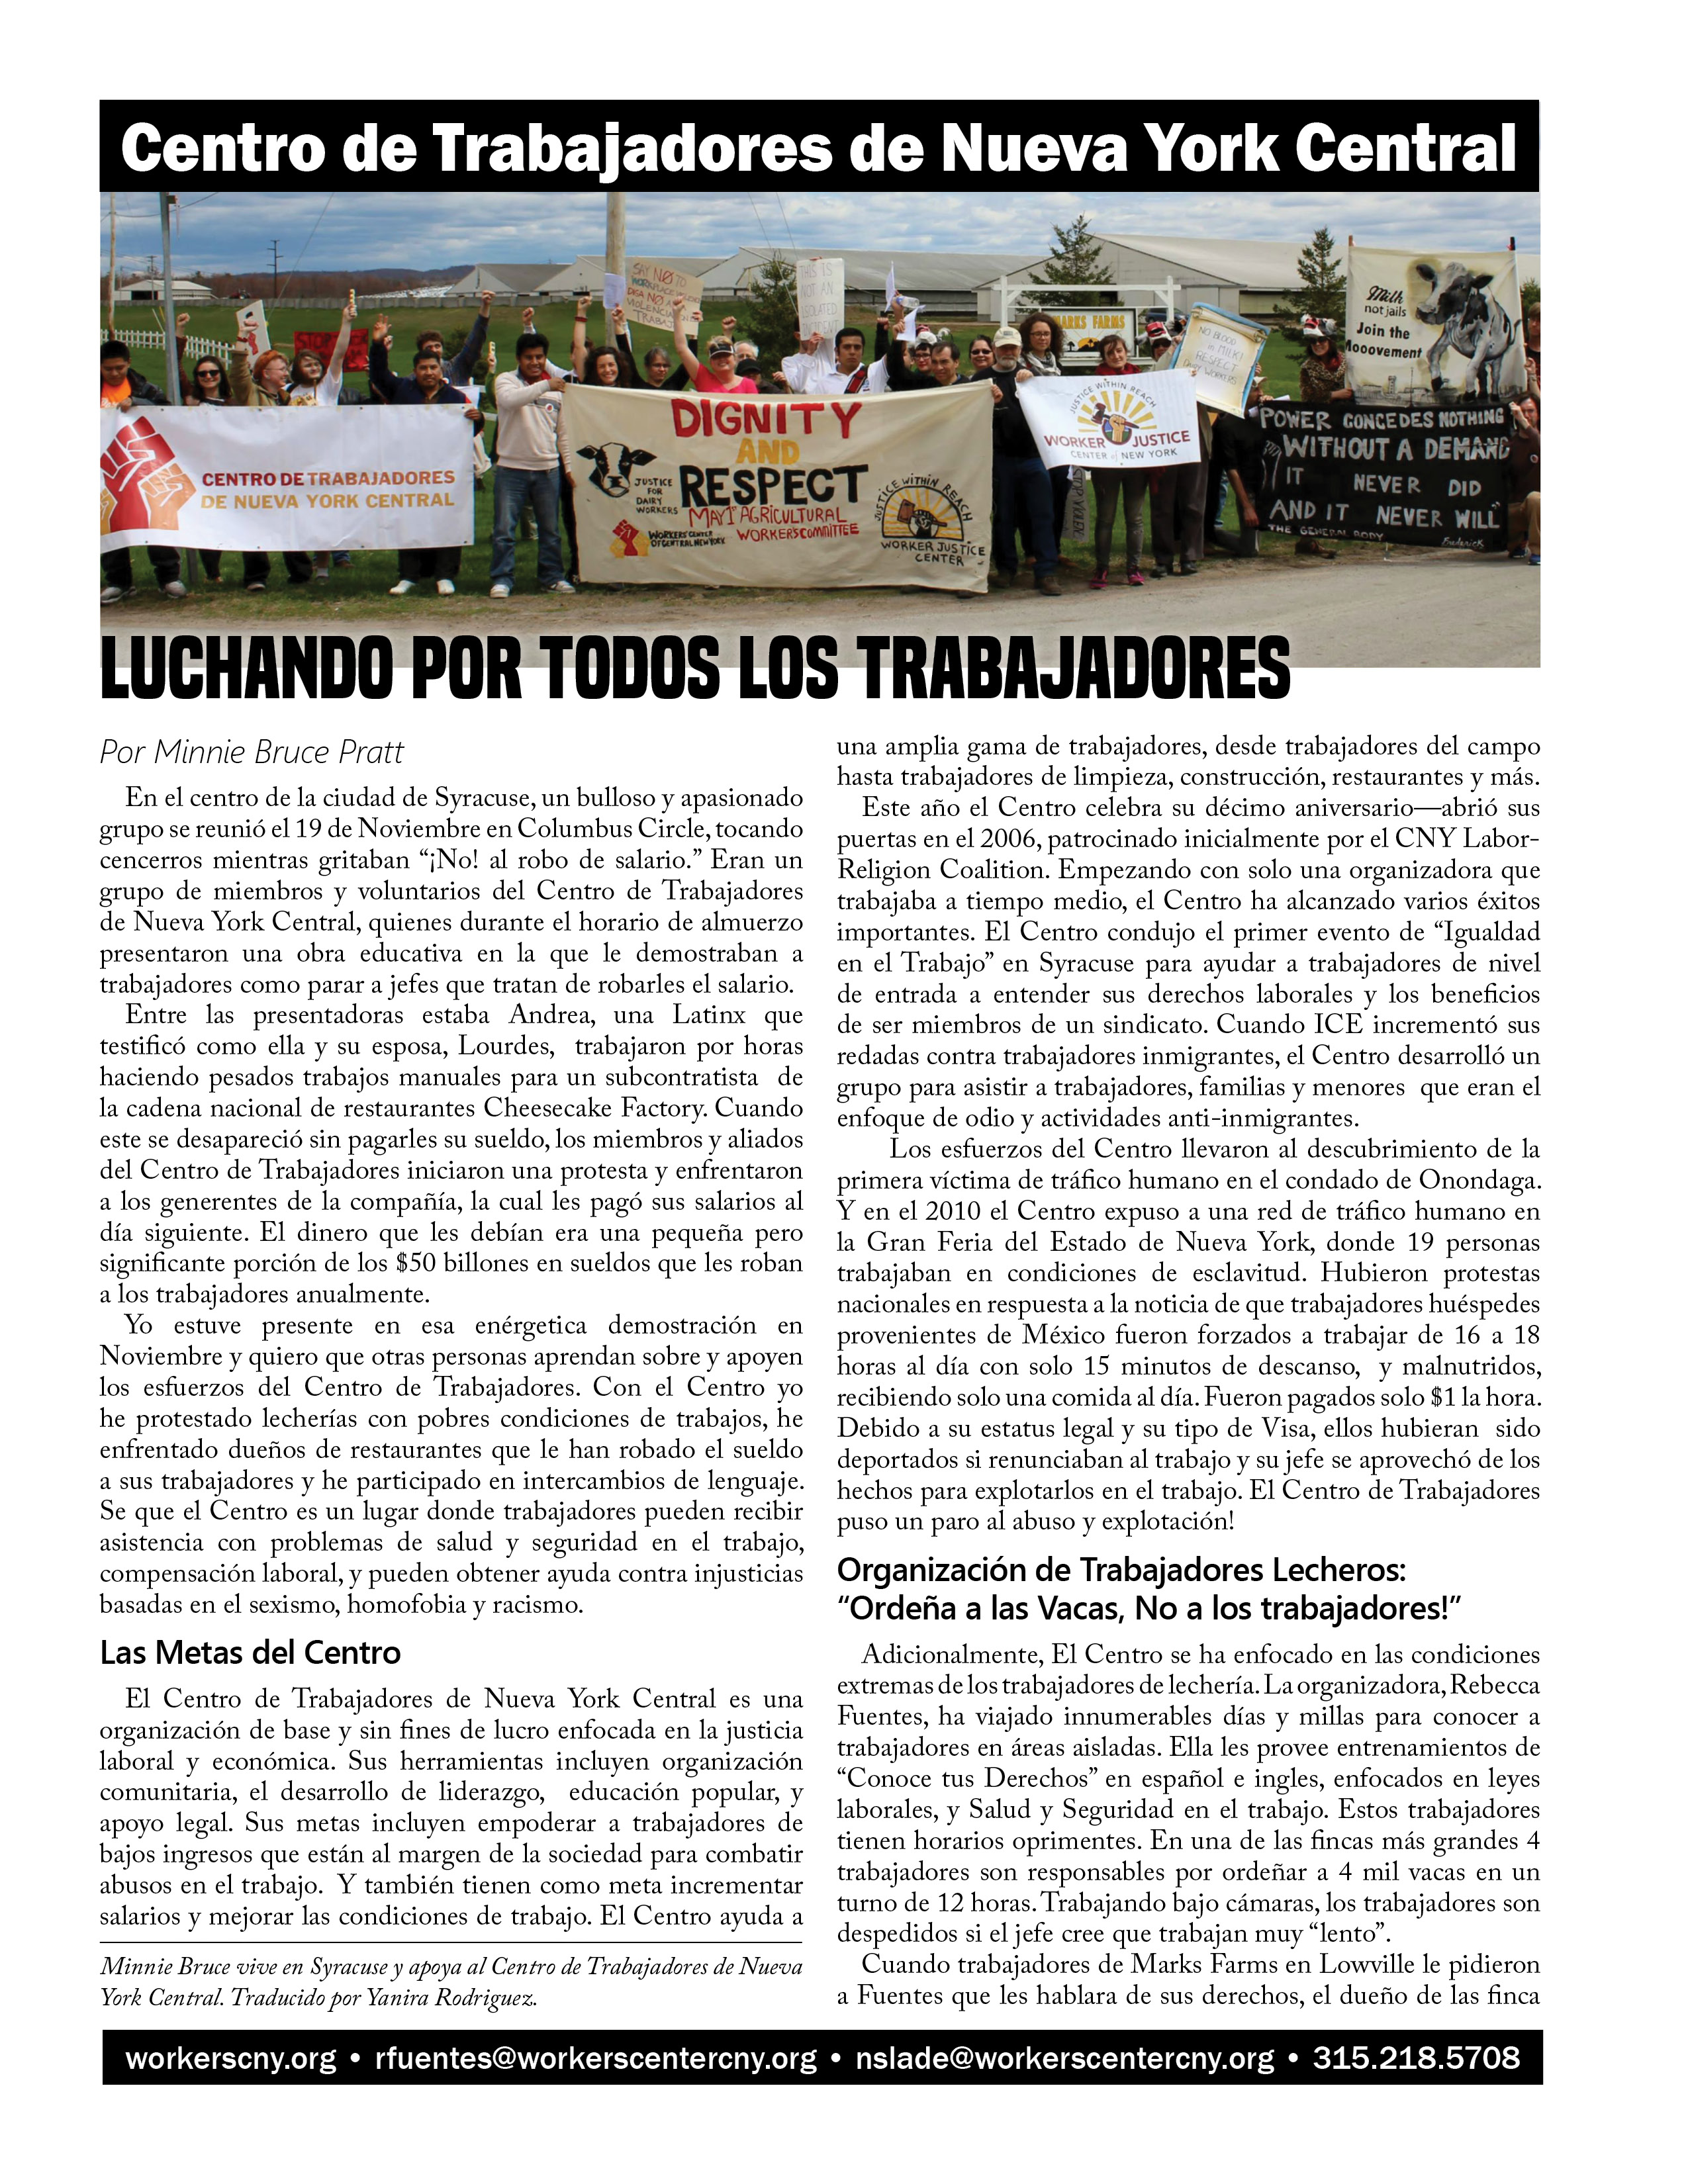 Spanish Cover of Worker's Center special pullout